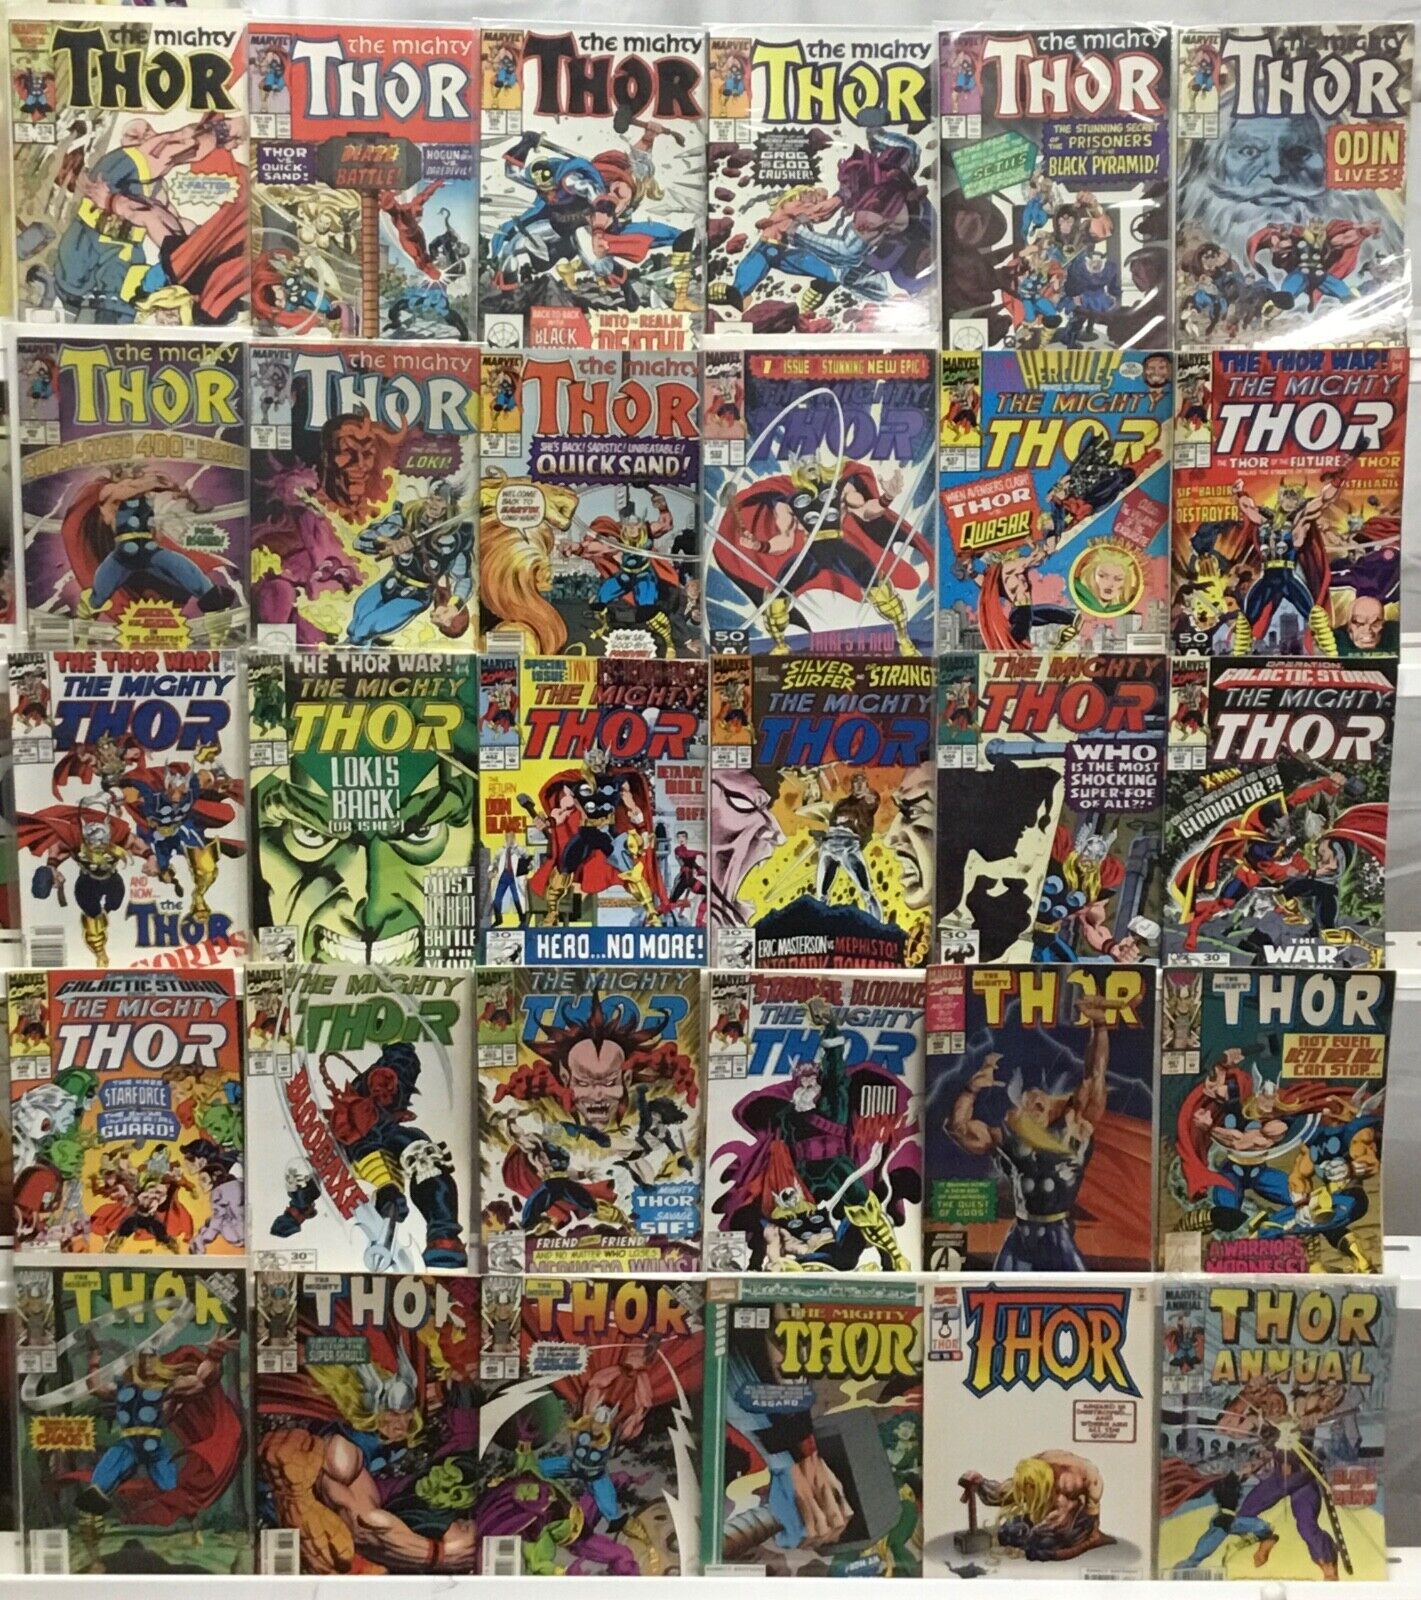 Marvel Comics - The Mighty Thor 1st Series - Comic Book Lot of 30 Issues